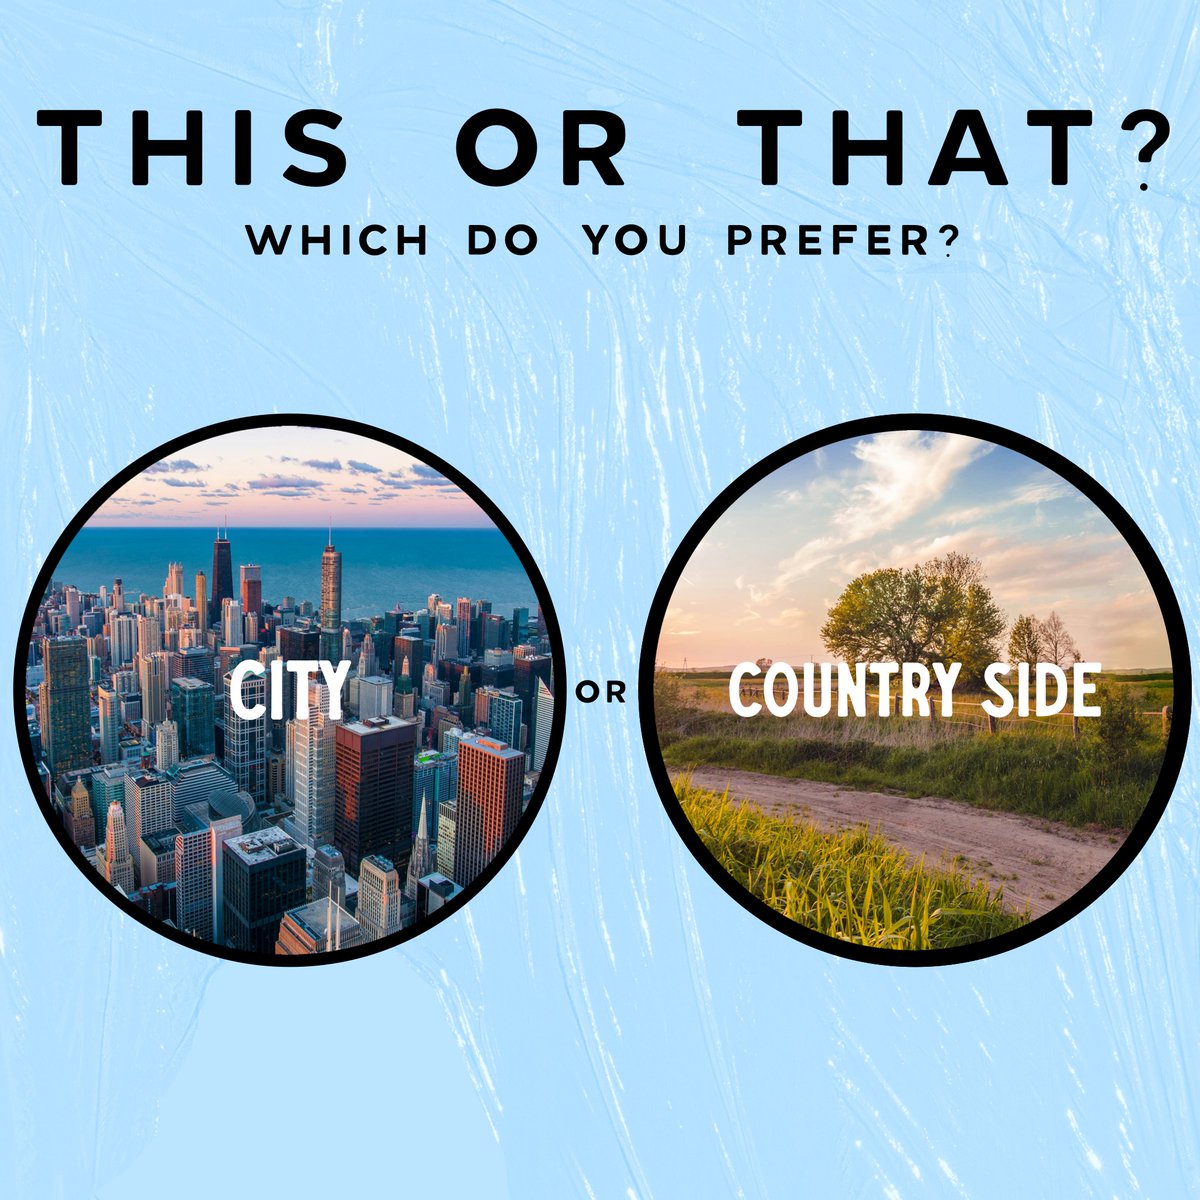 Which do you prefer? Let us know in the comments below! #acop #americanconsumeropinion #surveysformoney #thisorthat #city #countryside #thisorthatquestions